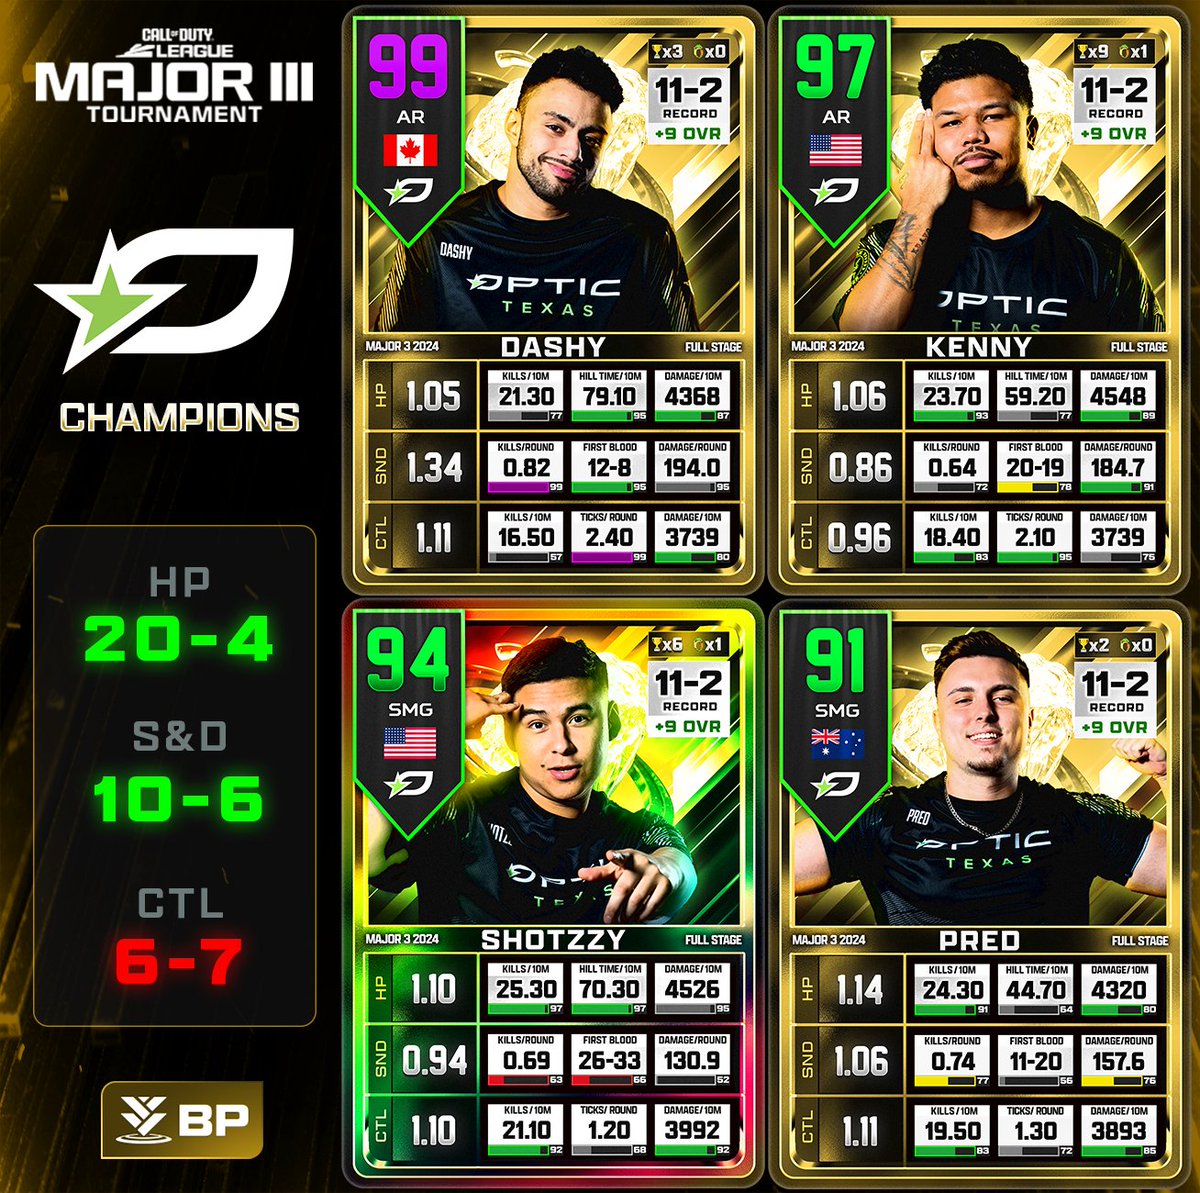 CDL Stage 3 Cards - @OpTicTexas [Champions]

*This is for the whole stage*

Stats via: @GGBreakingPoint